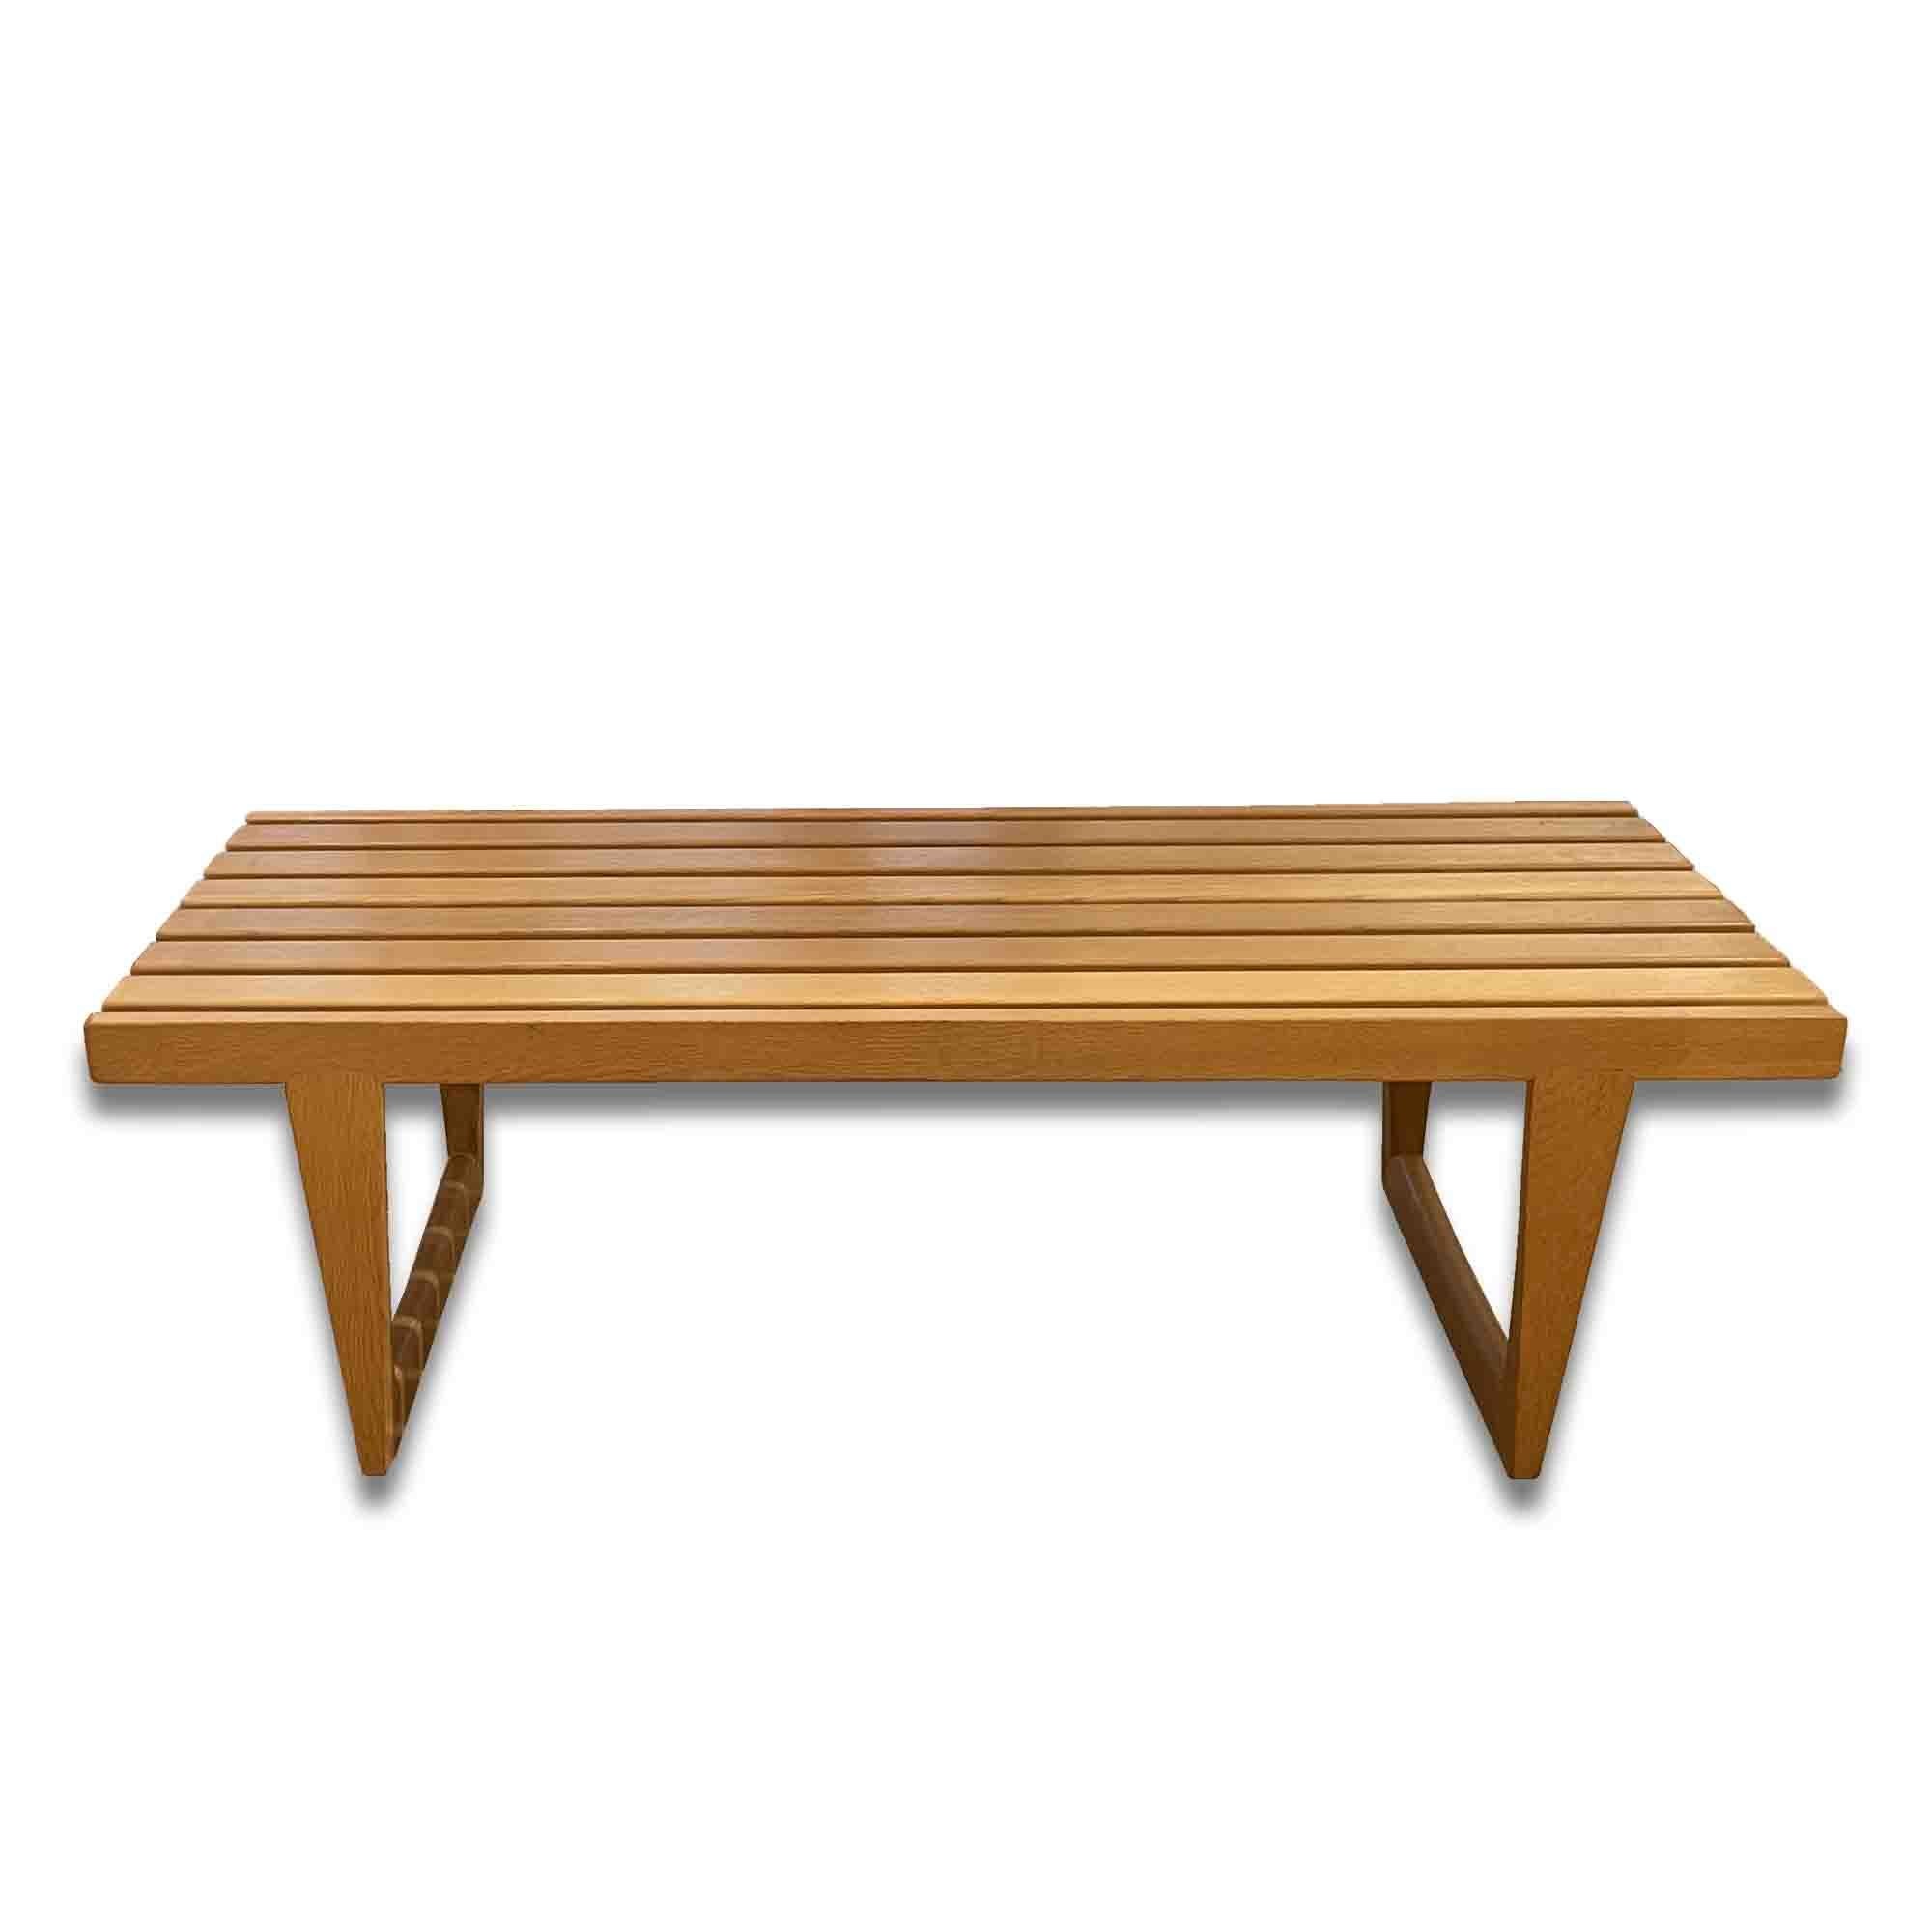 Sandstrom's work is known for its functional, minimalist aesthetic, as well as its use of sustainable, eco-friendly materials.
This bench is both a sleek design and a functional piece thanks to its classic style and natural charm of solid oak. A